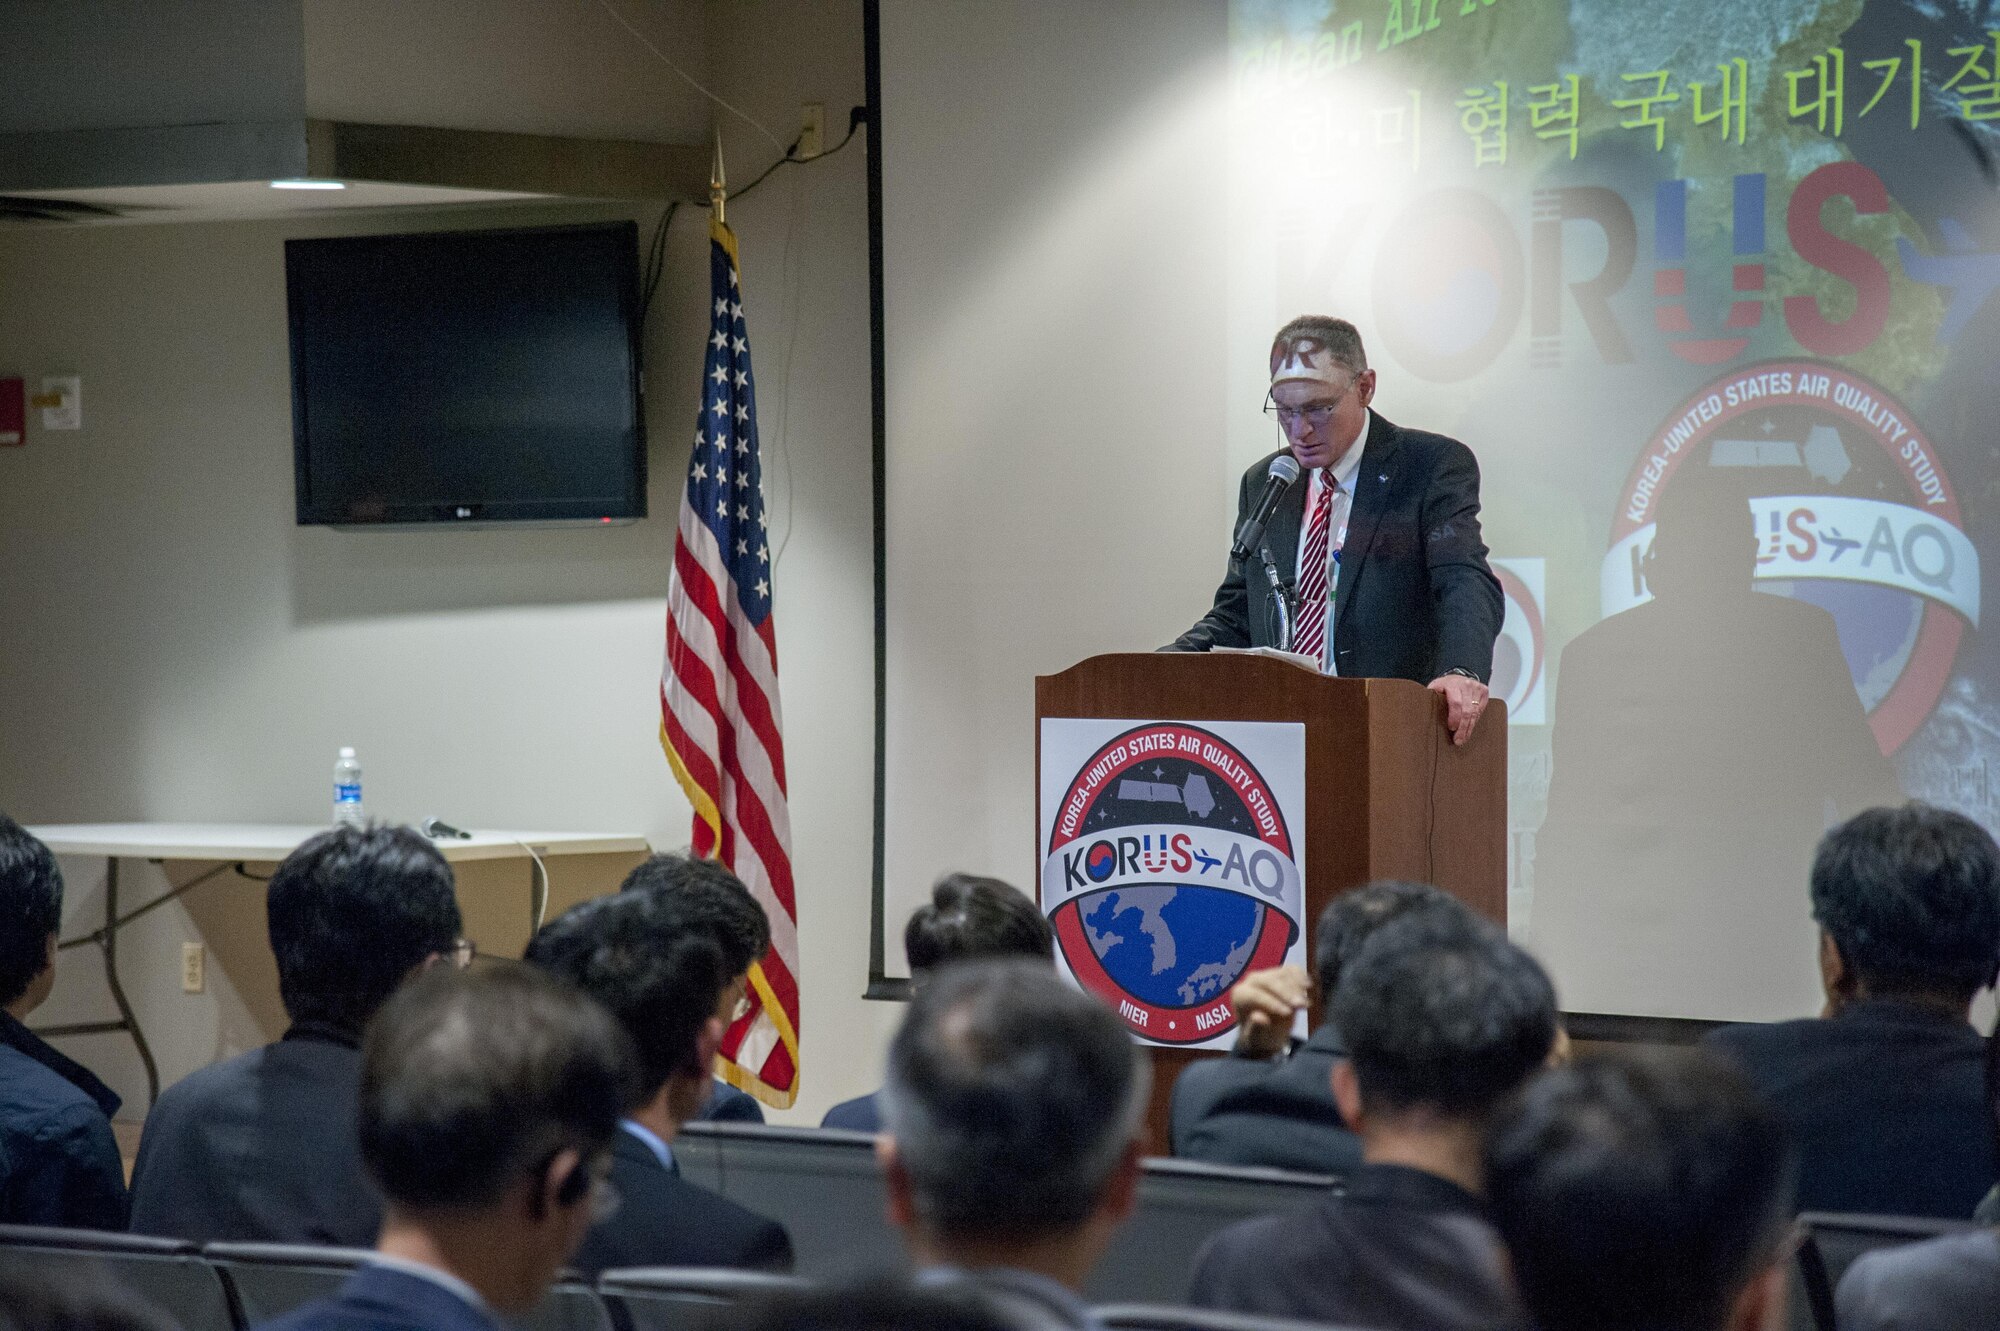 Barry Lefer, Korea United States-Air Quality (KORUS-AQ) program scientist, gives opening remarks for the KORUS-AQ experiment media day at Osan Air Base, Republic of Korea, April 29, 2016. KORUS-AQ is a joint field study by NASA and the National Institute of Environmental Research that will advance the ability to monitor air pollution more accurately from space. (U.S. Air Force photo by Staff Sgt. Jonathan Steffen/Released)